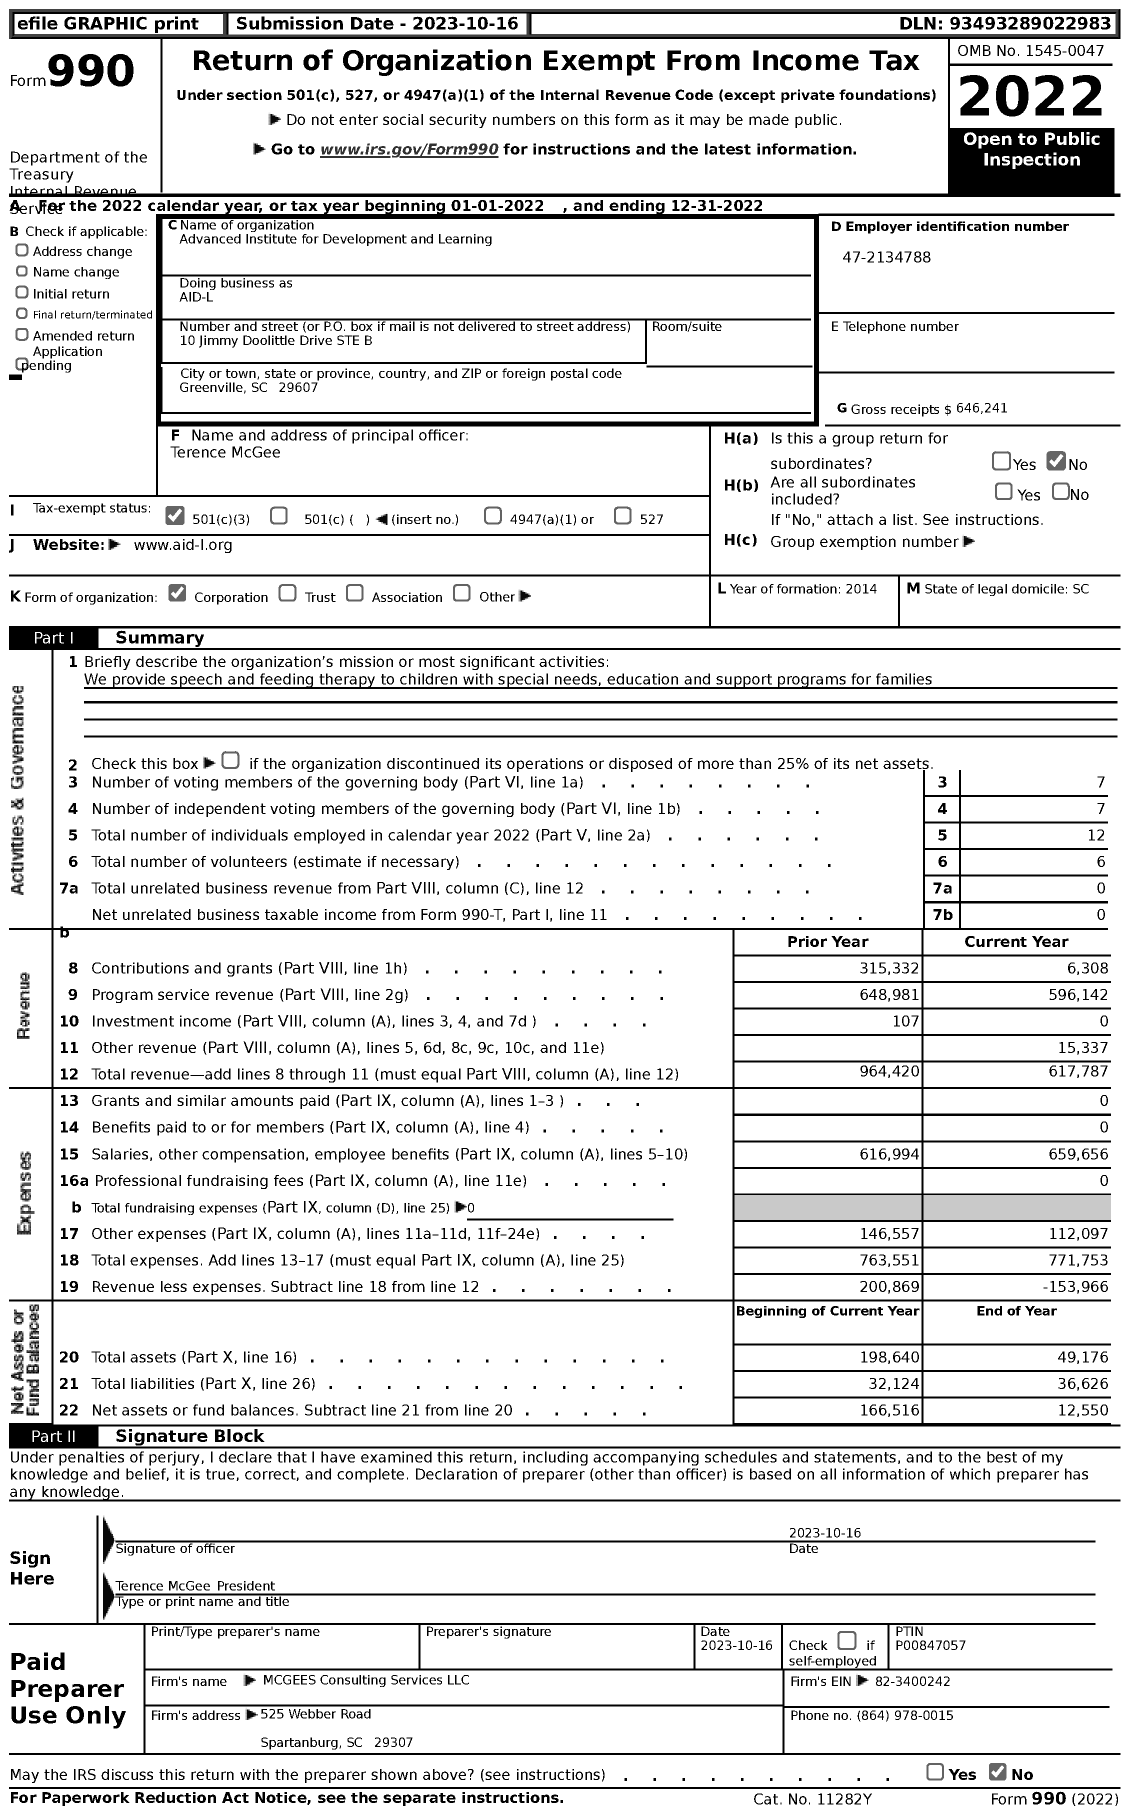 Image of first page of 2022 Form 990 for Advanced Institute for Development and Learning (AID-L)